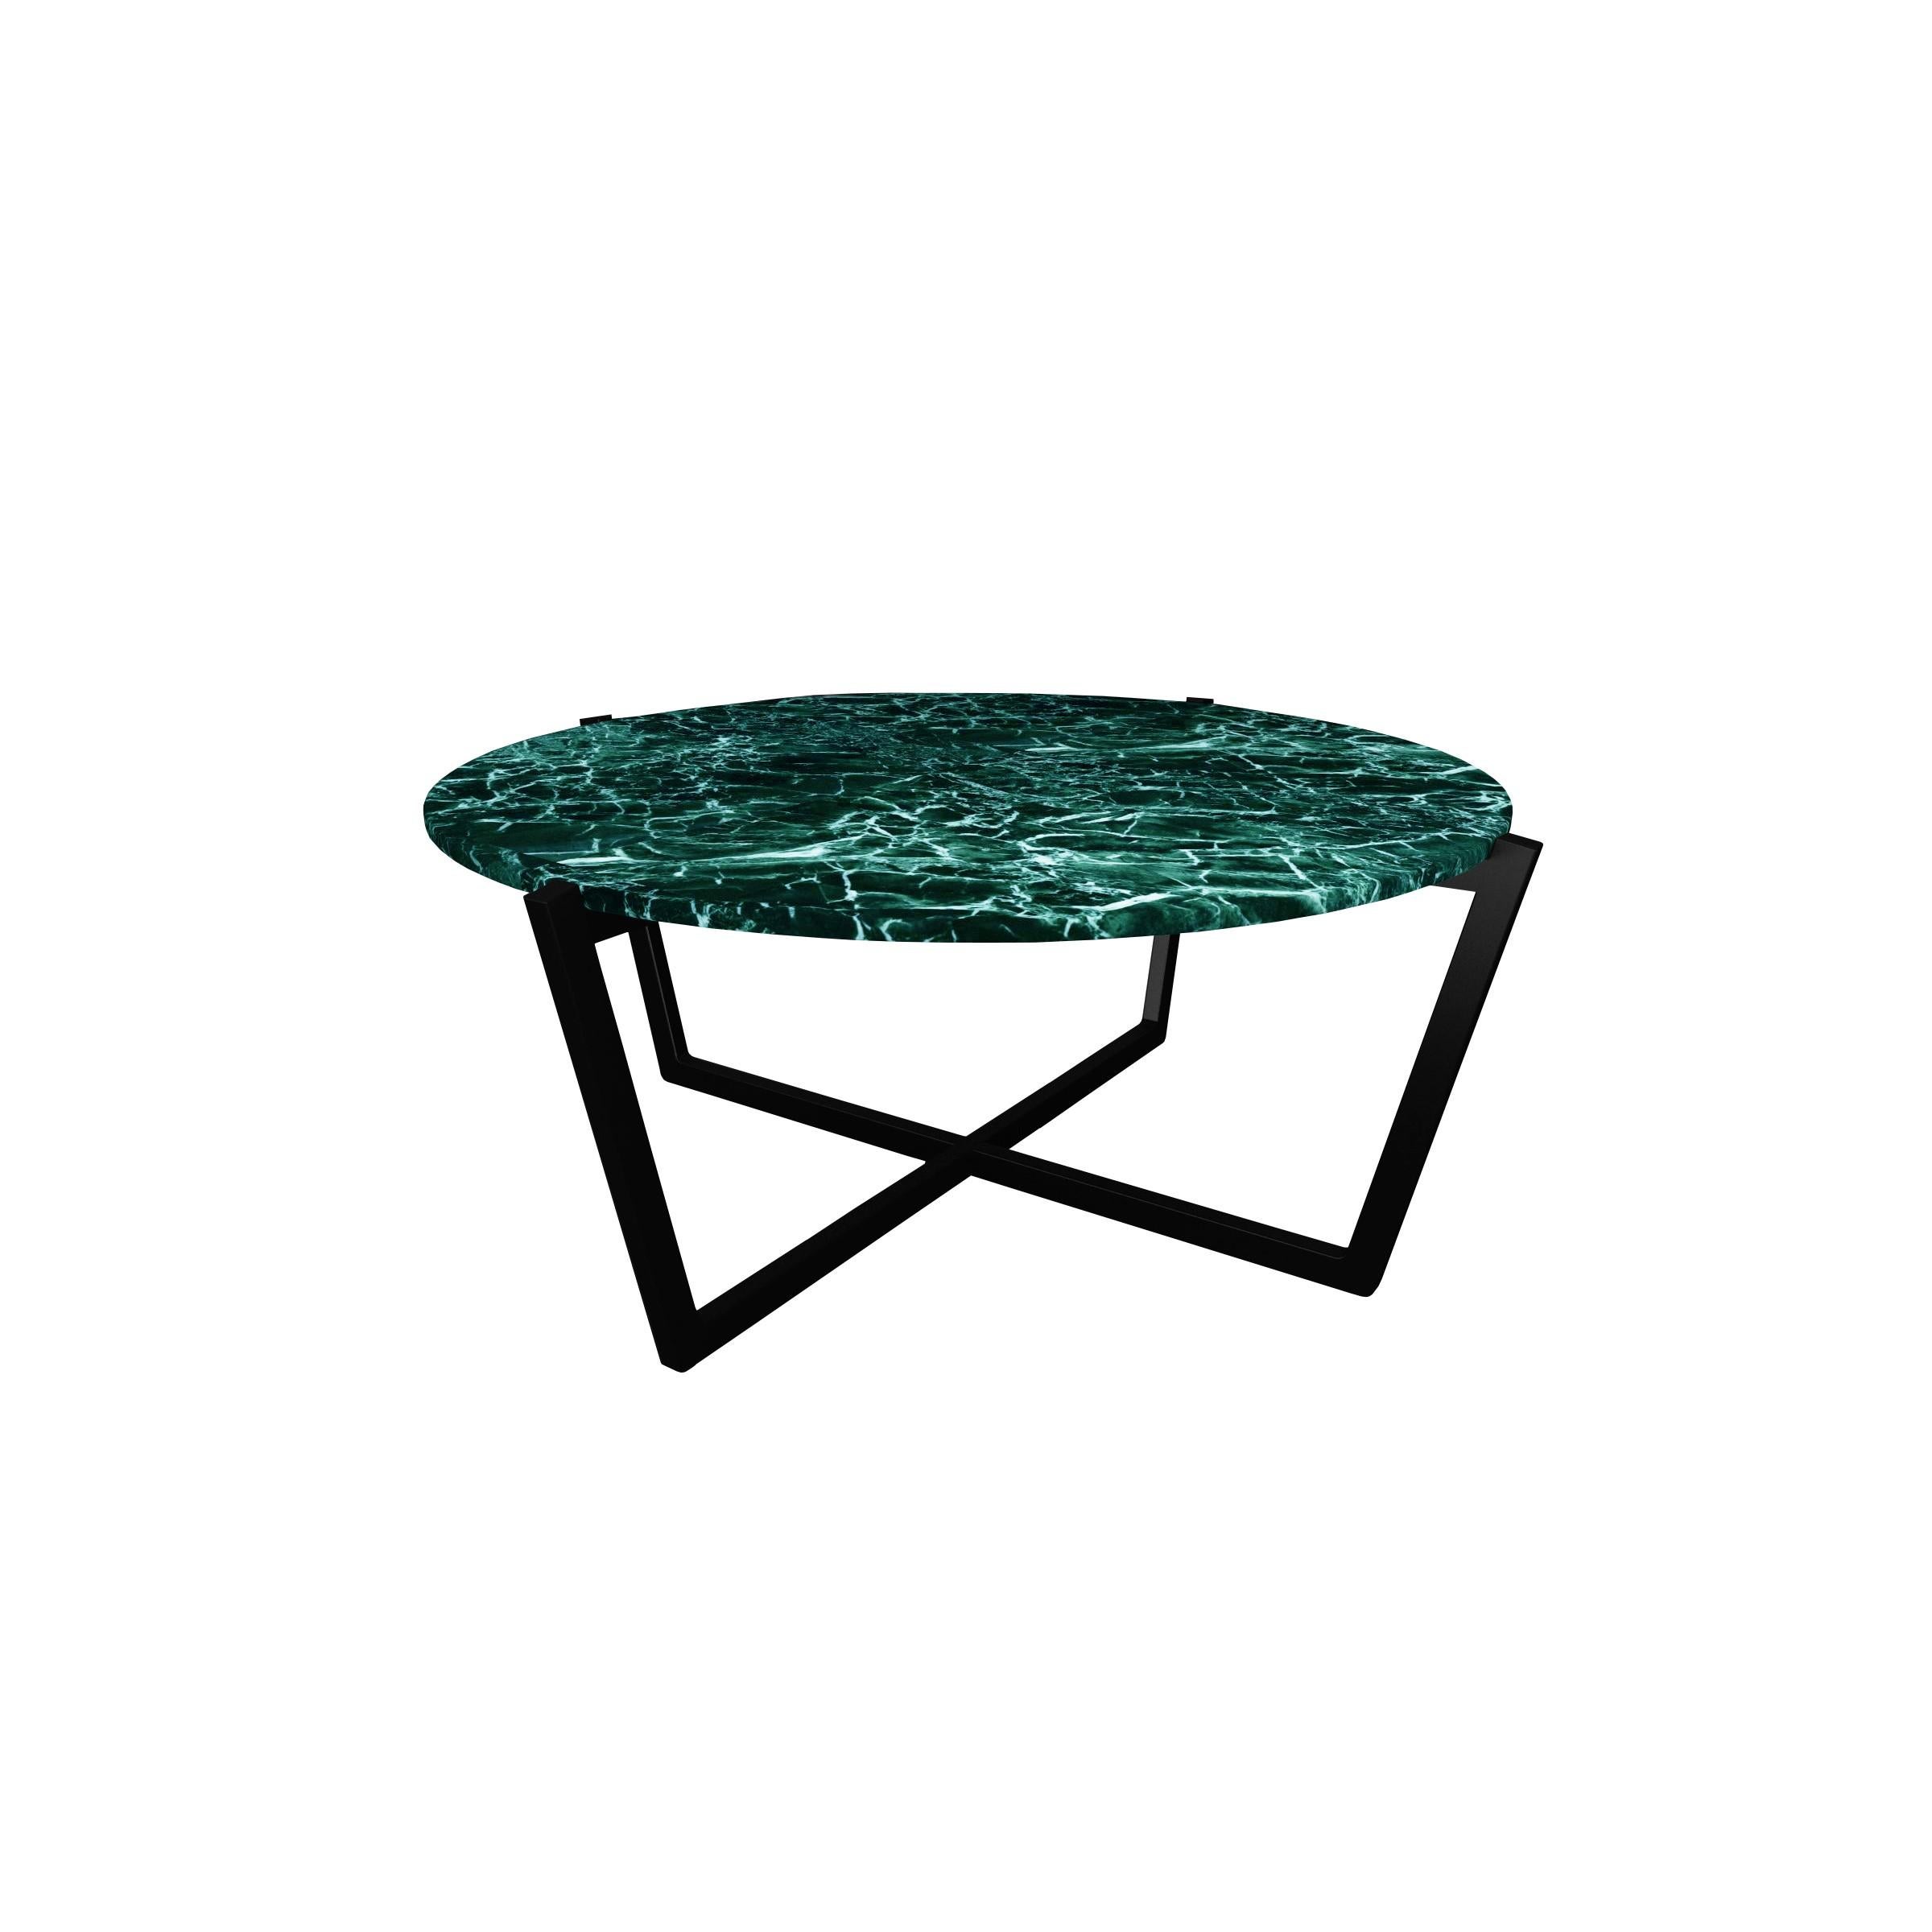 𝗣𝗿𝗼𝗱𝘂𝗰𝘁 𝗗𝗲𝘁𝗮𝗶𝗹𝘀:
NORDST EMMA Coffee Round Table from Italian Grey Rain Marble, Danish Modern Design, New

Cross-style frame going up to the tabletop in four straight points, revealing the beautiful carefully chosen marble piece that